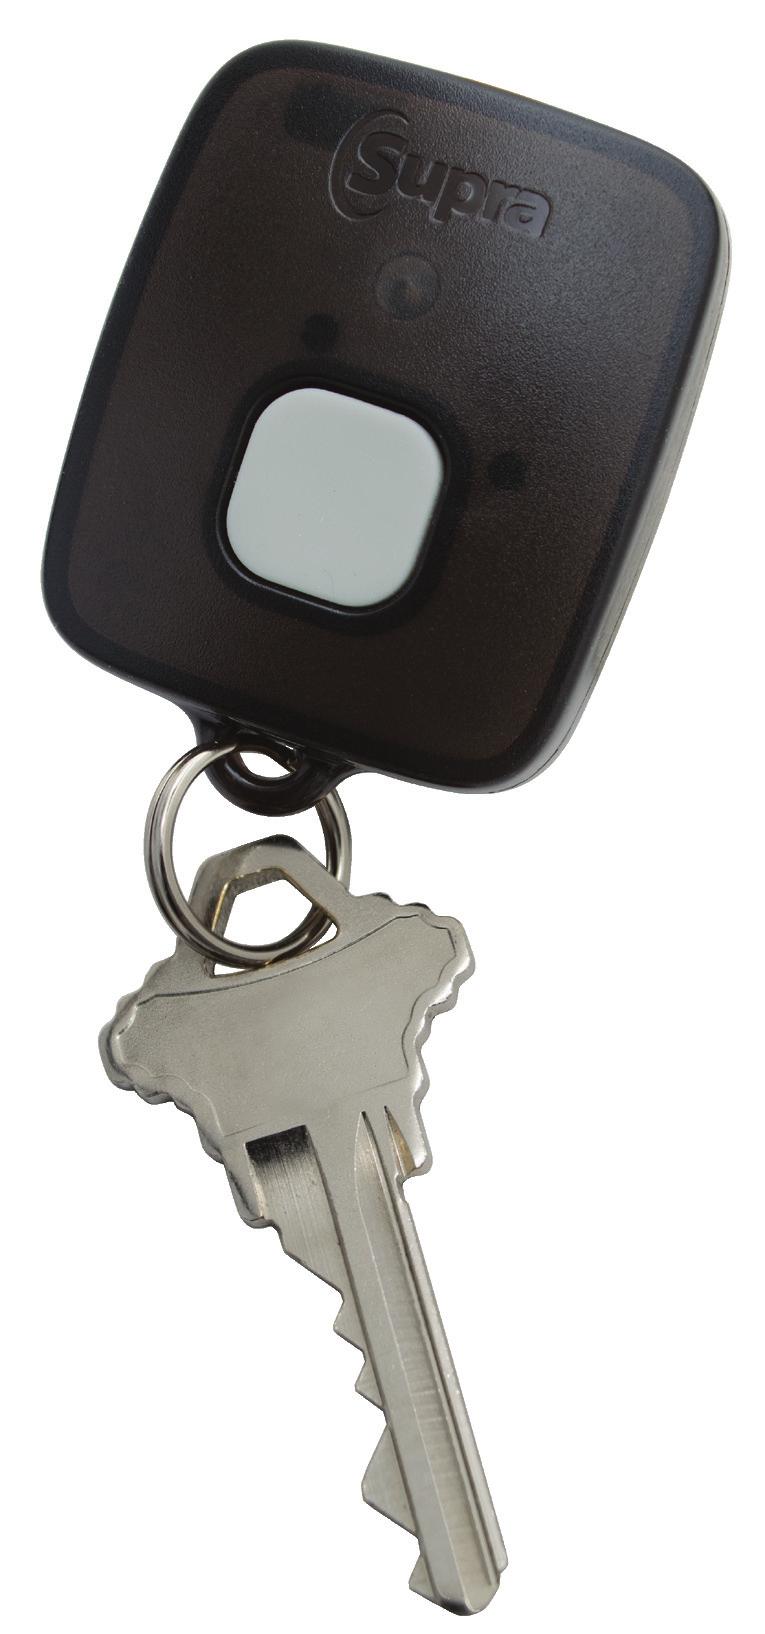 Simply press the button when prompted ekey Fob works with the ekey application on a real estate agent s smartphone to